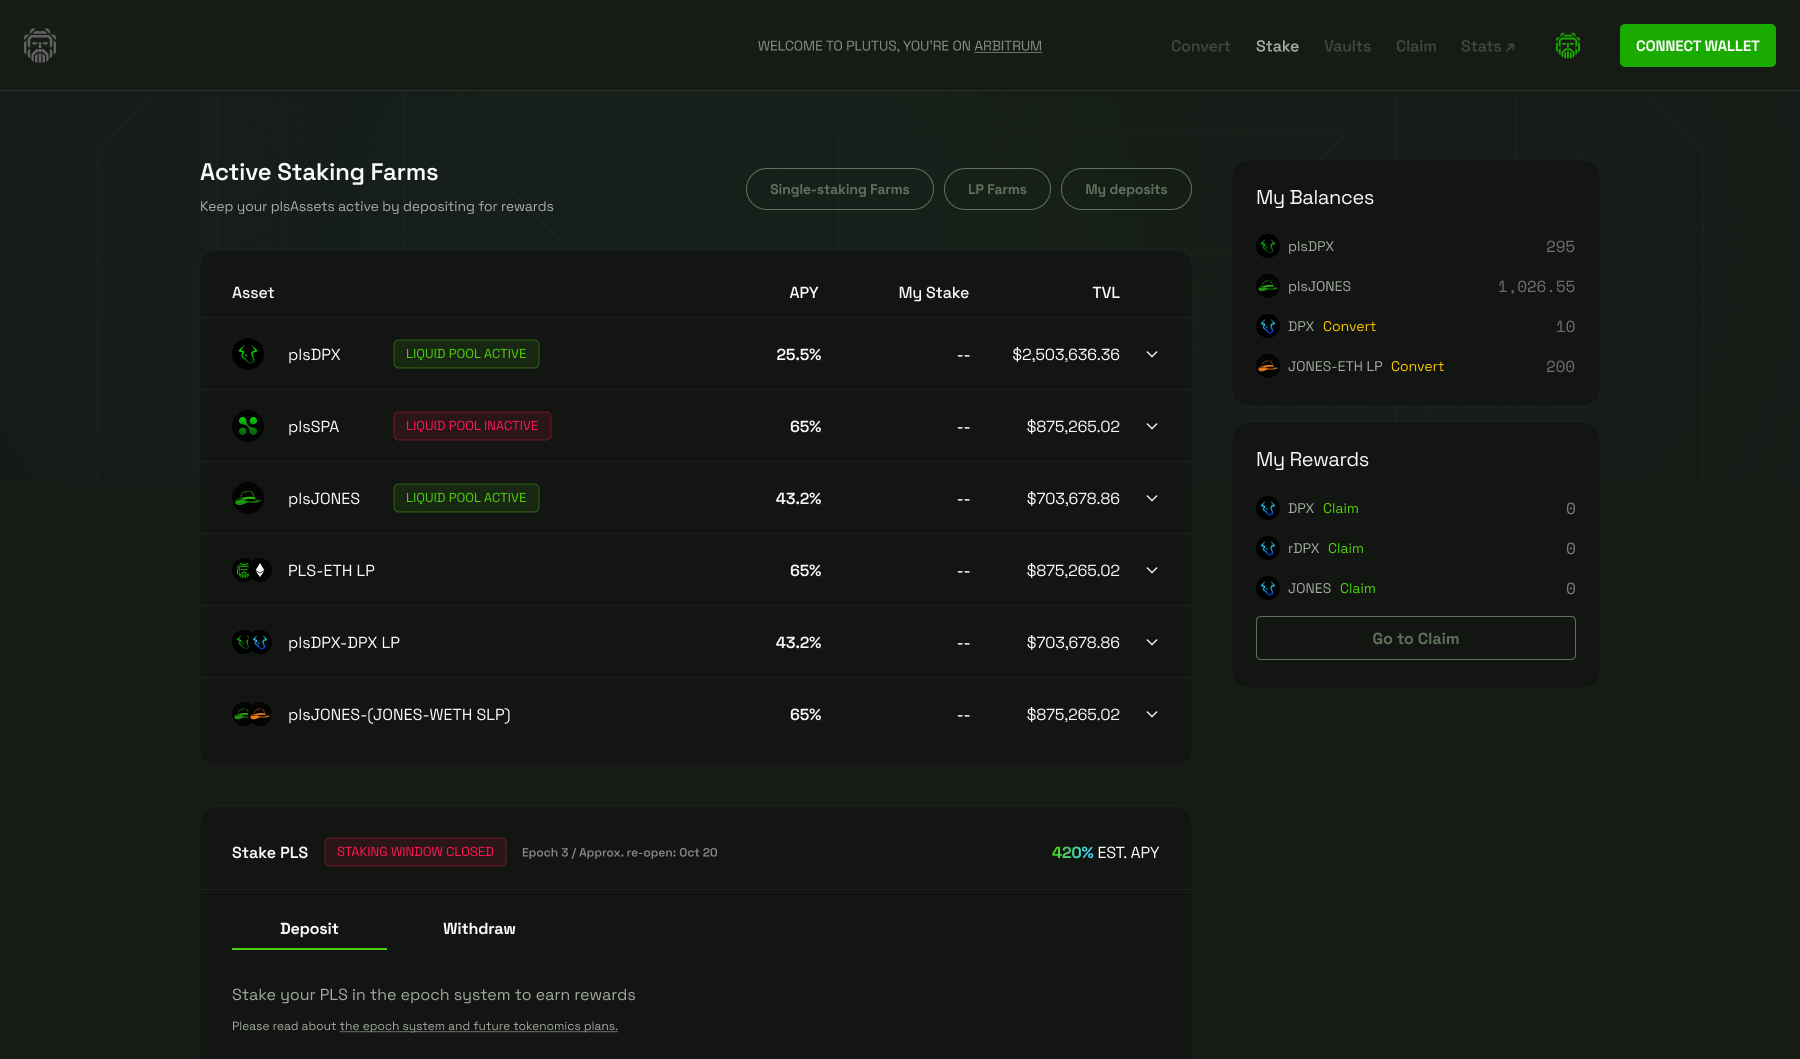 New incoming frontend design for the Stake tab on the website